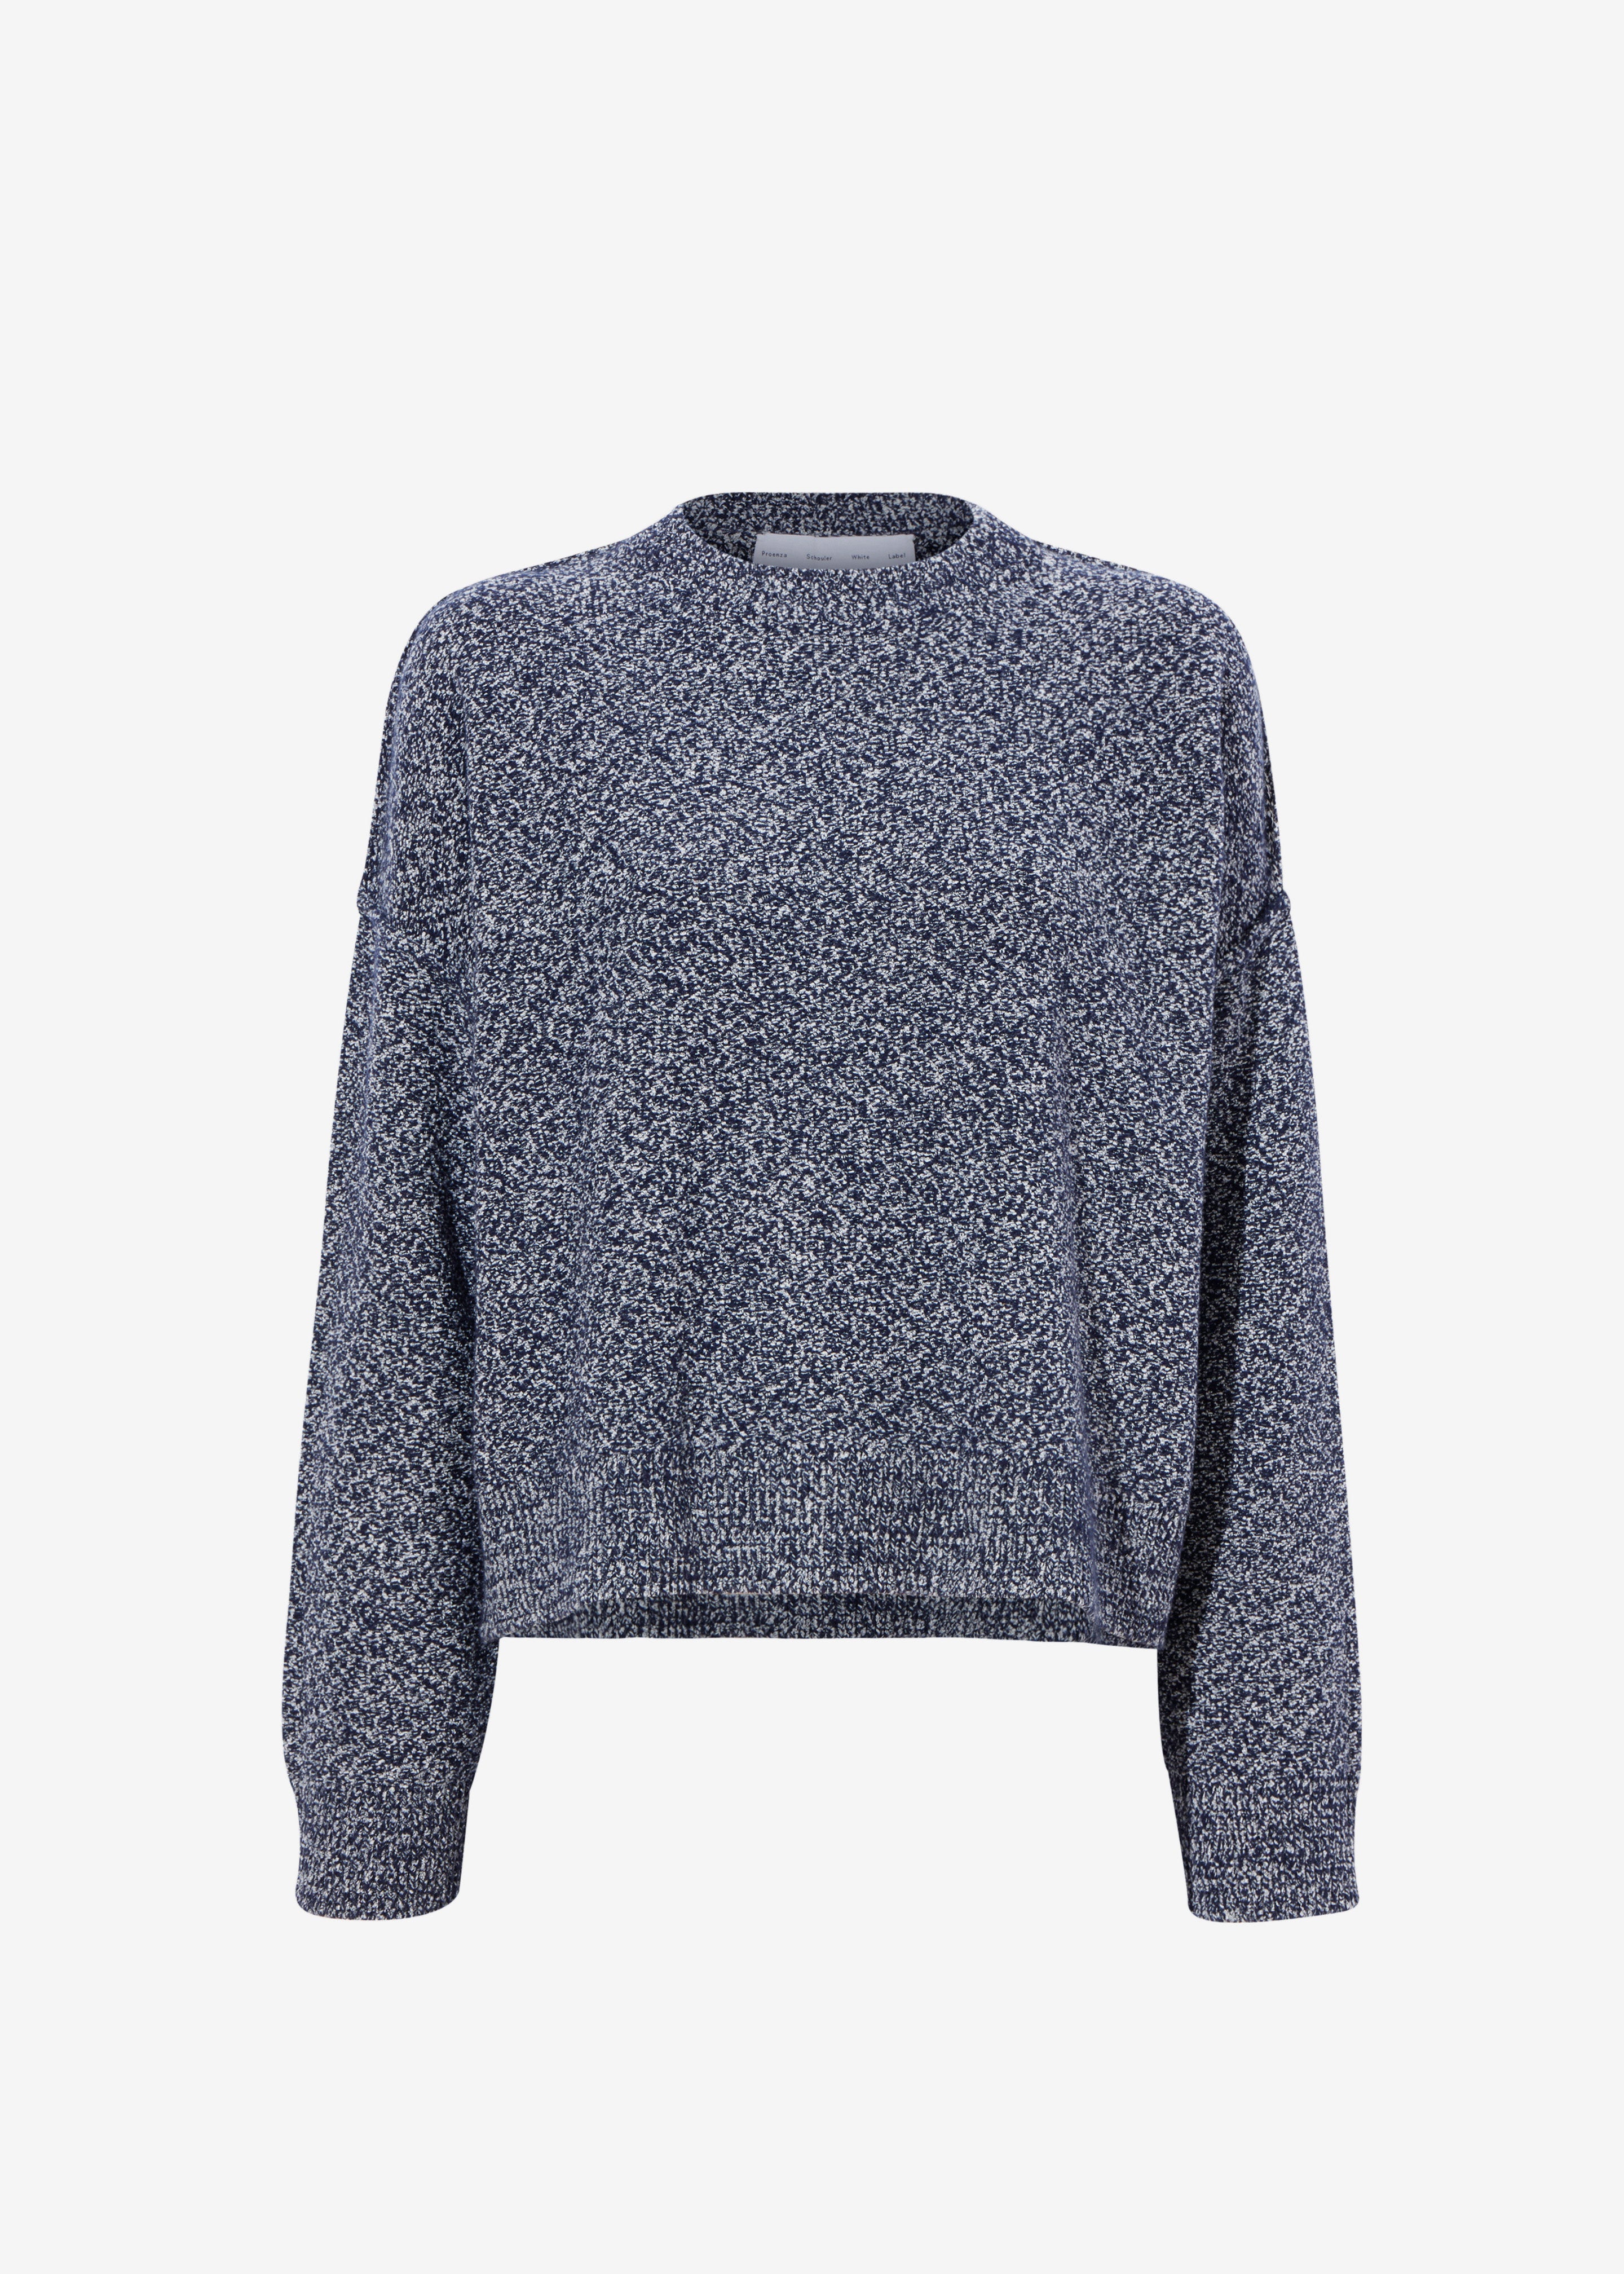 Proenza Schouler White Label Remy Sweater In Marled Knits - Dark Blue/Off White - 7